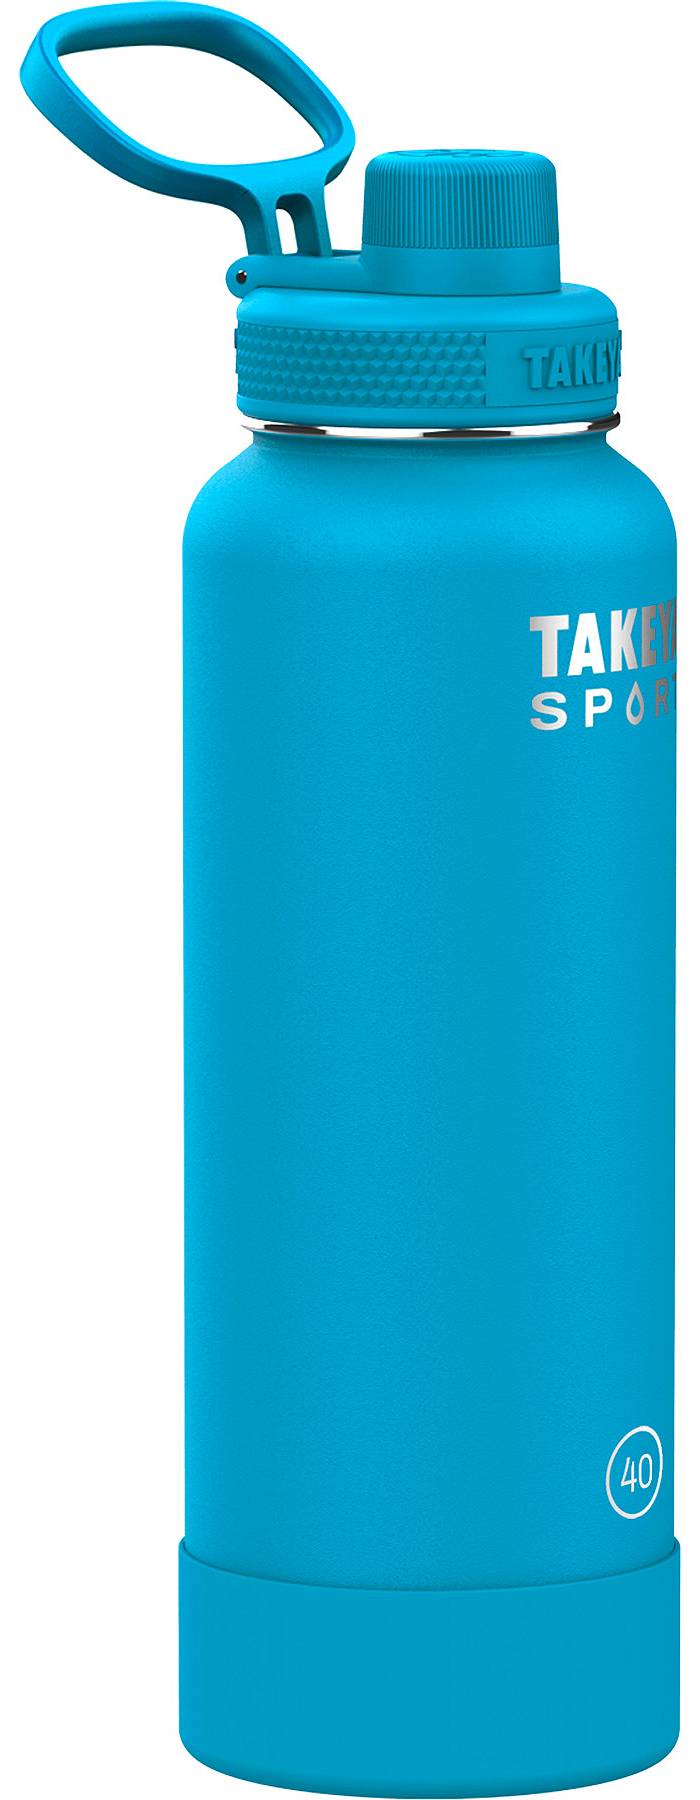 Takeya 64oz Actives Insulated Stainless Steel Water Bottle with Straw Lid  and Extra Large Carry Handle - Pink